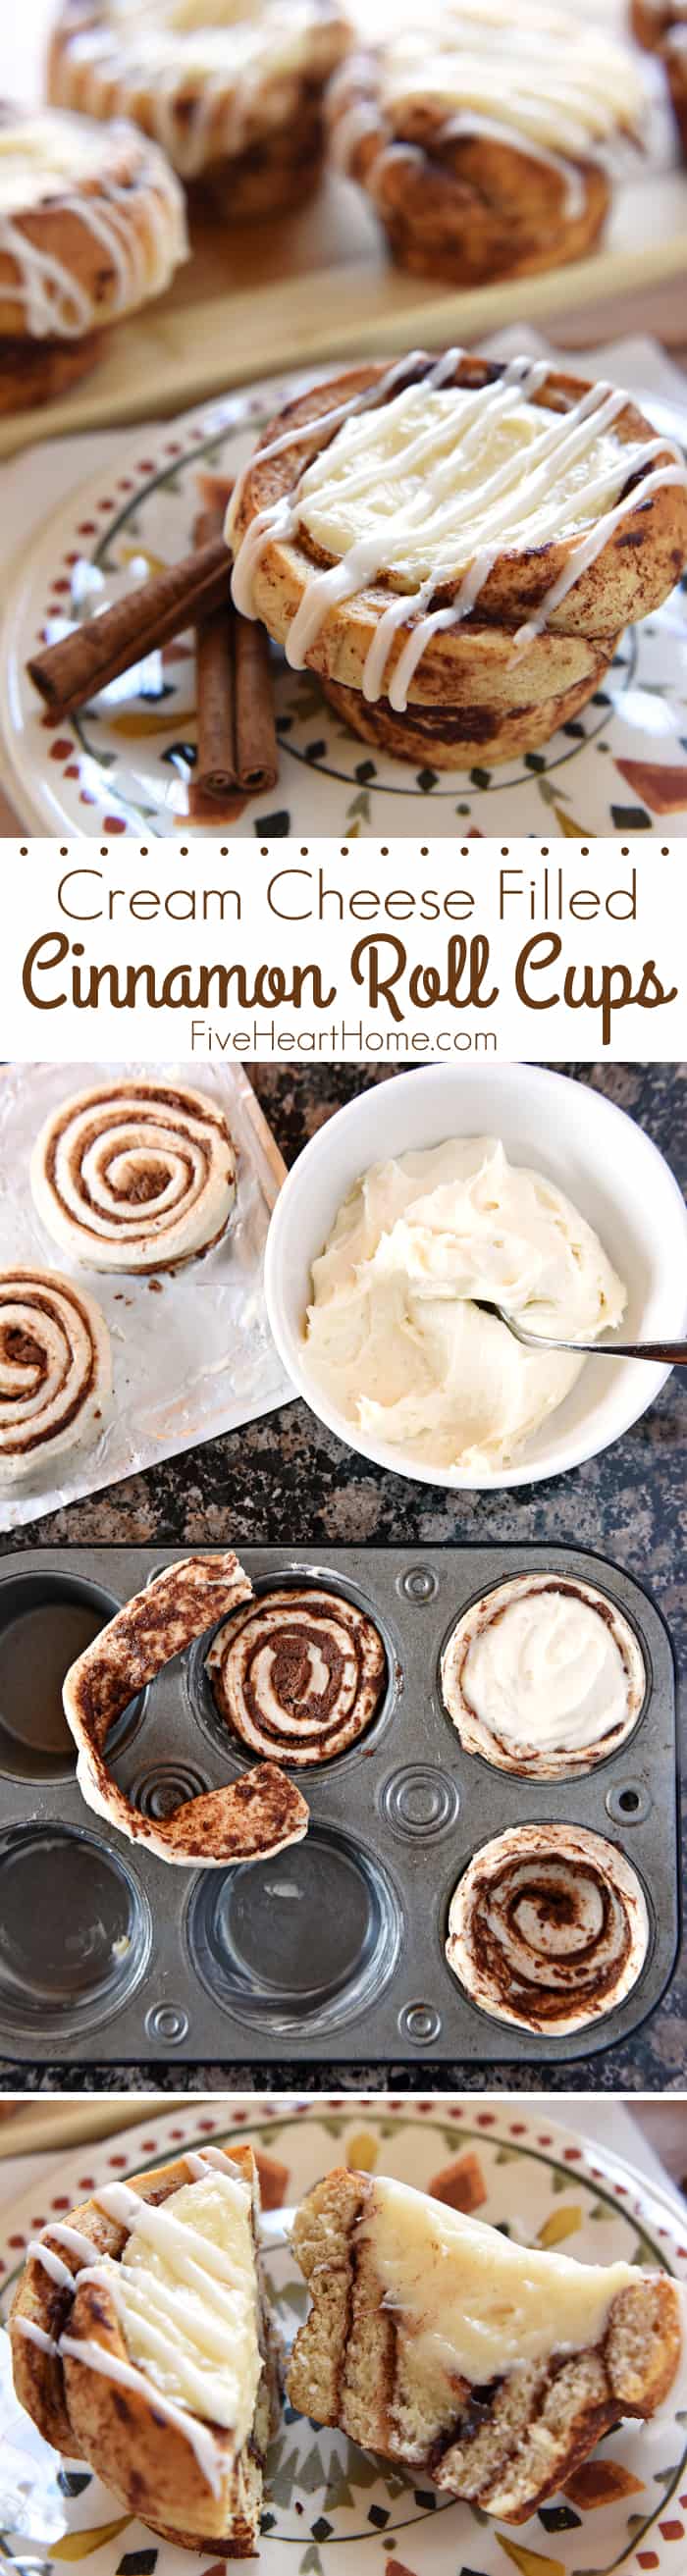 Cream Cheese Filled Cinnamon Roll Cups ~ fit refrigerated cinnamon rolls in a muffin pan, fill with sweetened cream cheese, bake until golden, and then drizzle with icing for a fun, easy, special breakfast treat! | FiveHeartHome.com via @fivehearthome